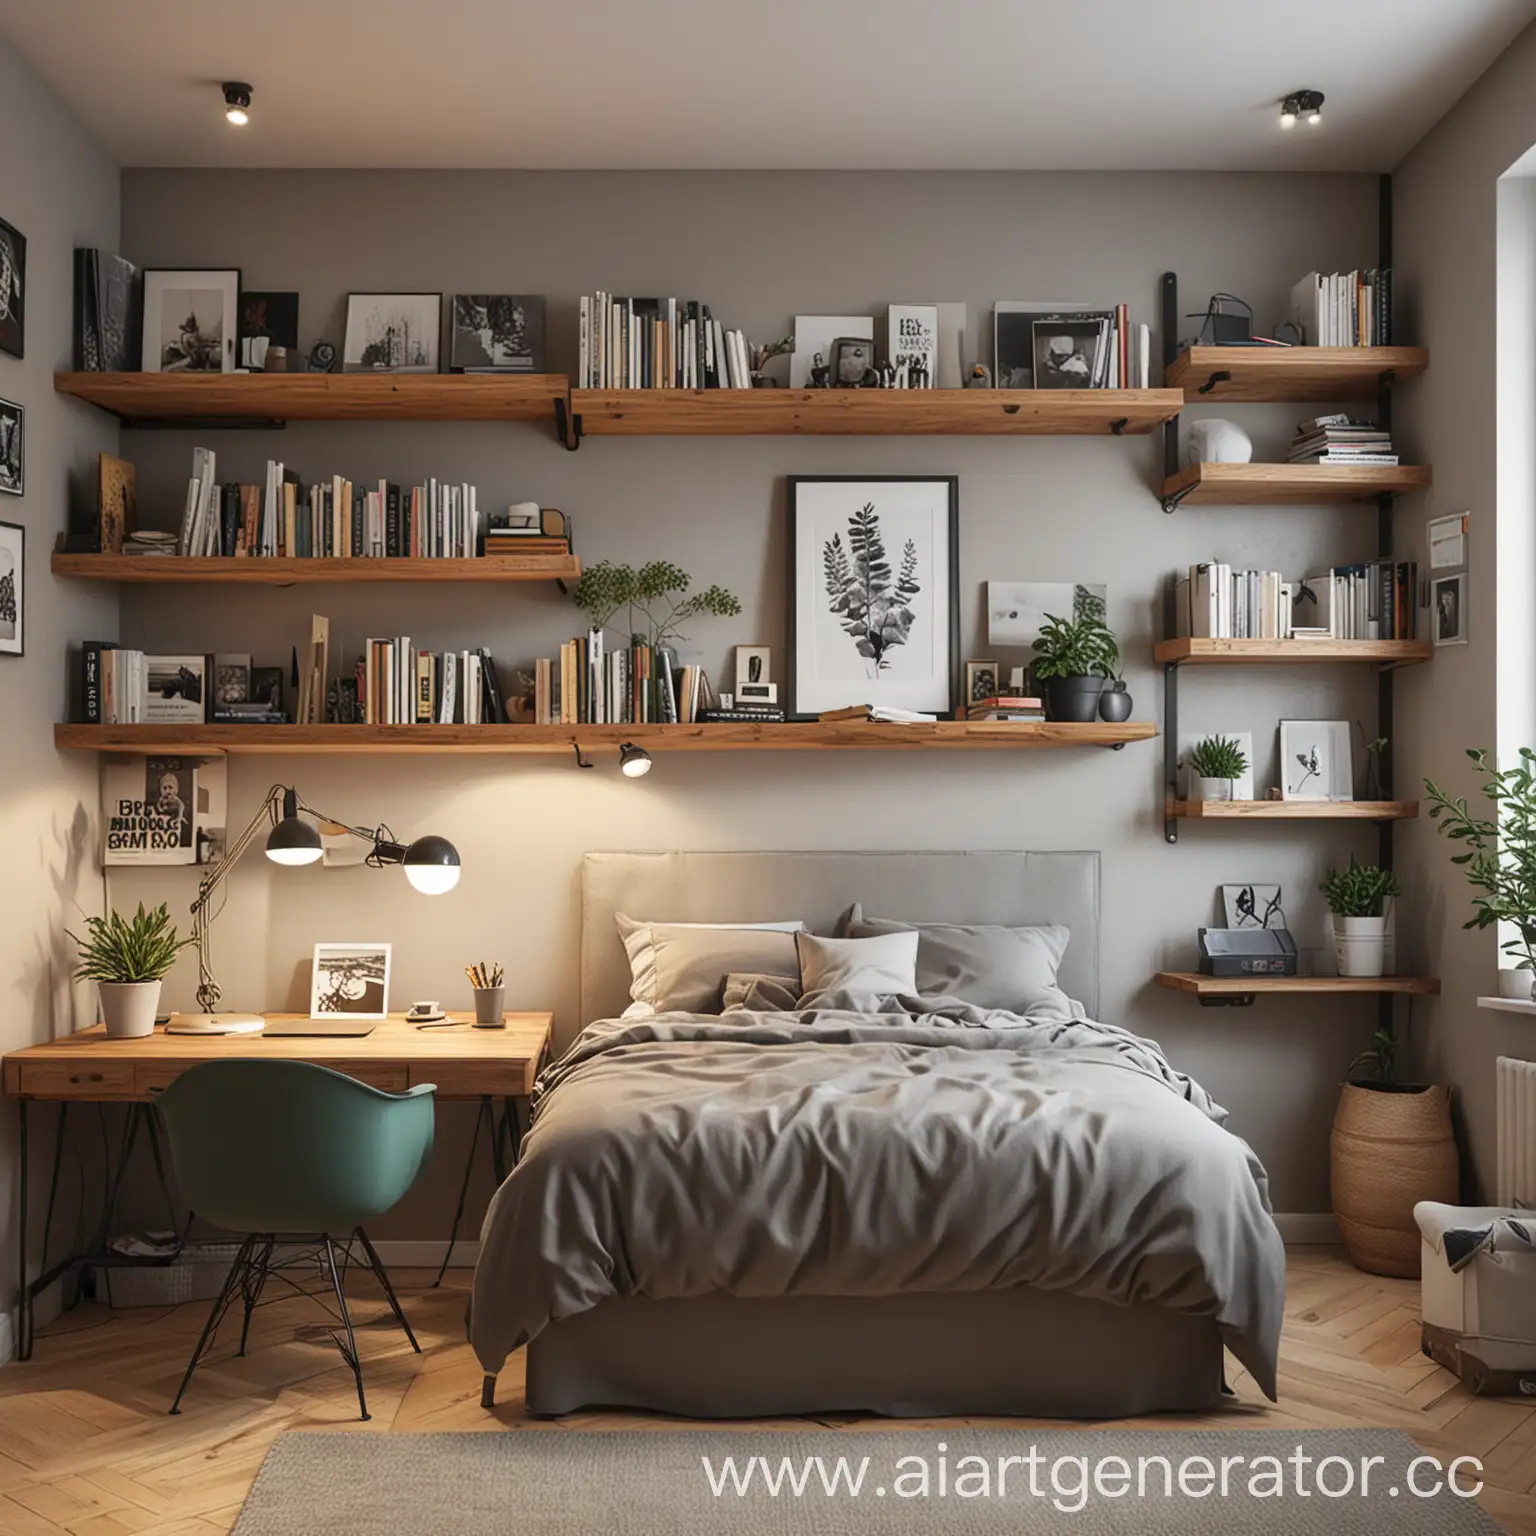 Cozy-Bedroom-and-Workspace-Design-with-Double-Bed-and-Wall-Shelves